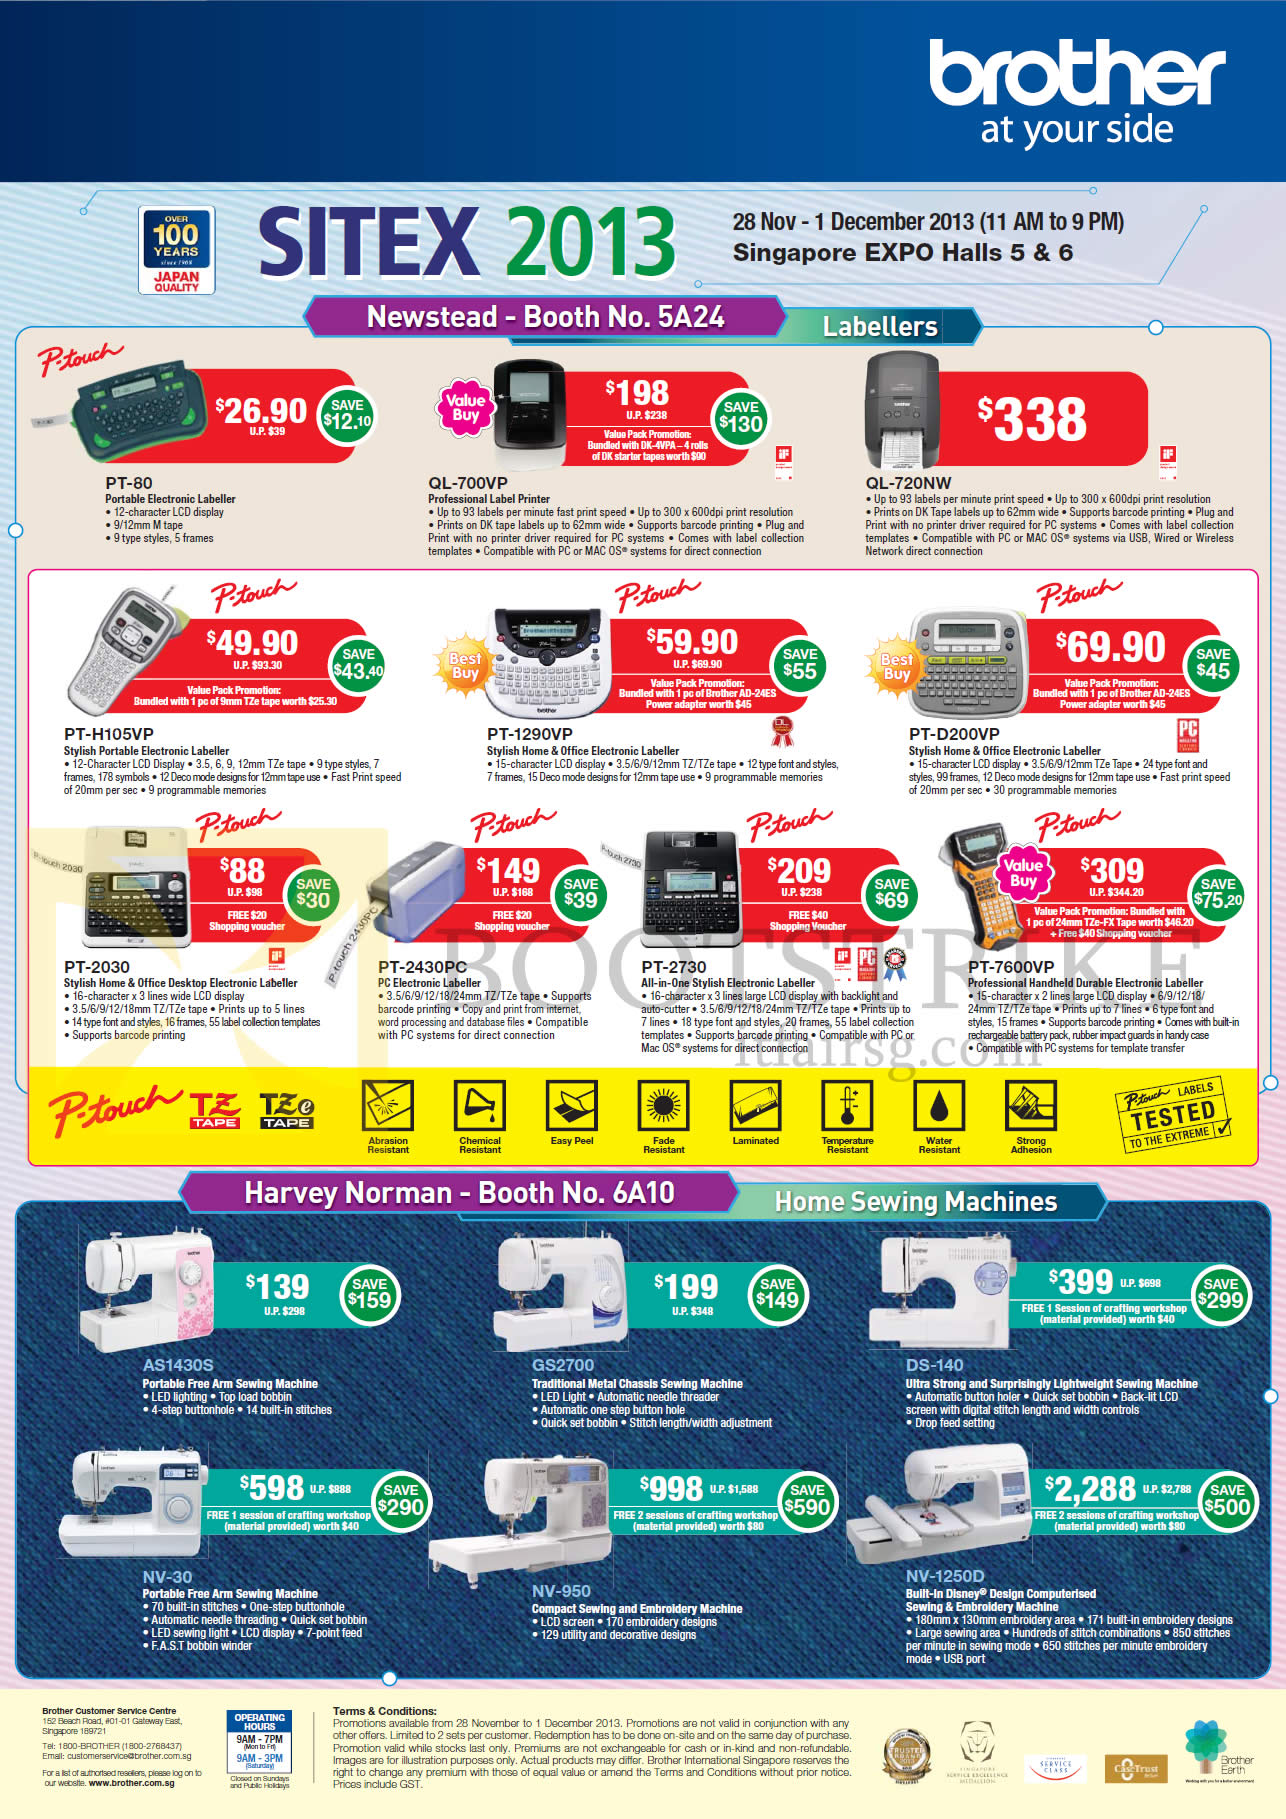 SITEX 2013 price list image brochure of Brother P-Touch Labellers, Sewing Machines PT-80, H105VP, 1290VP, D200VP, 2730, 7600VP, 2430PC, 2030, AS1430S, Ds-140, NV-1250D, NV-950